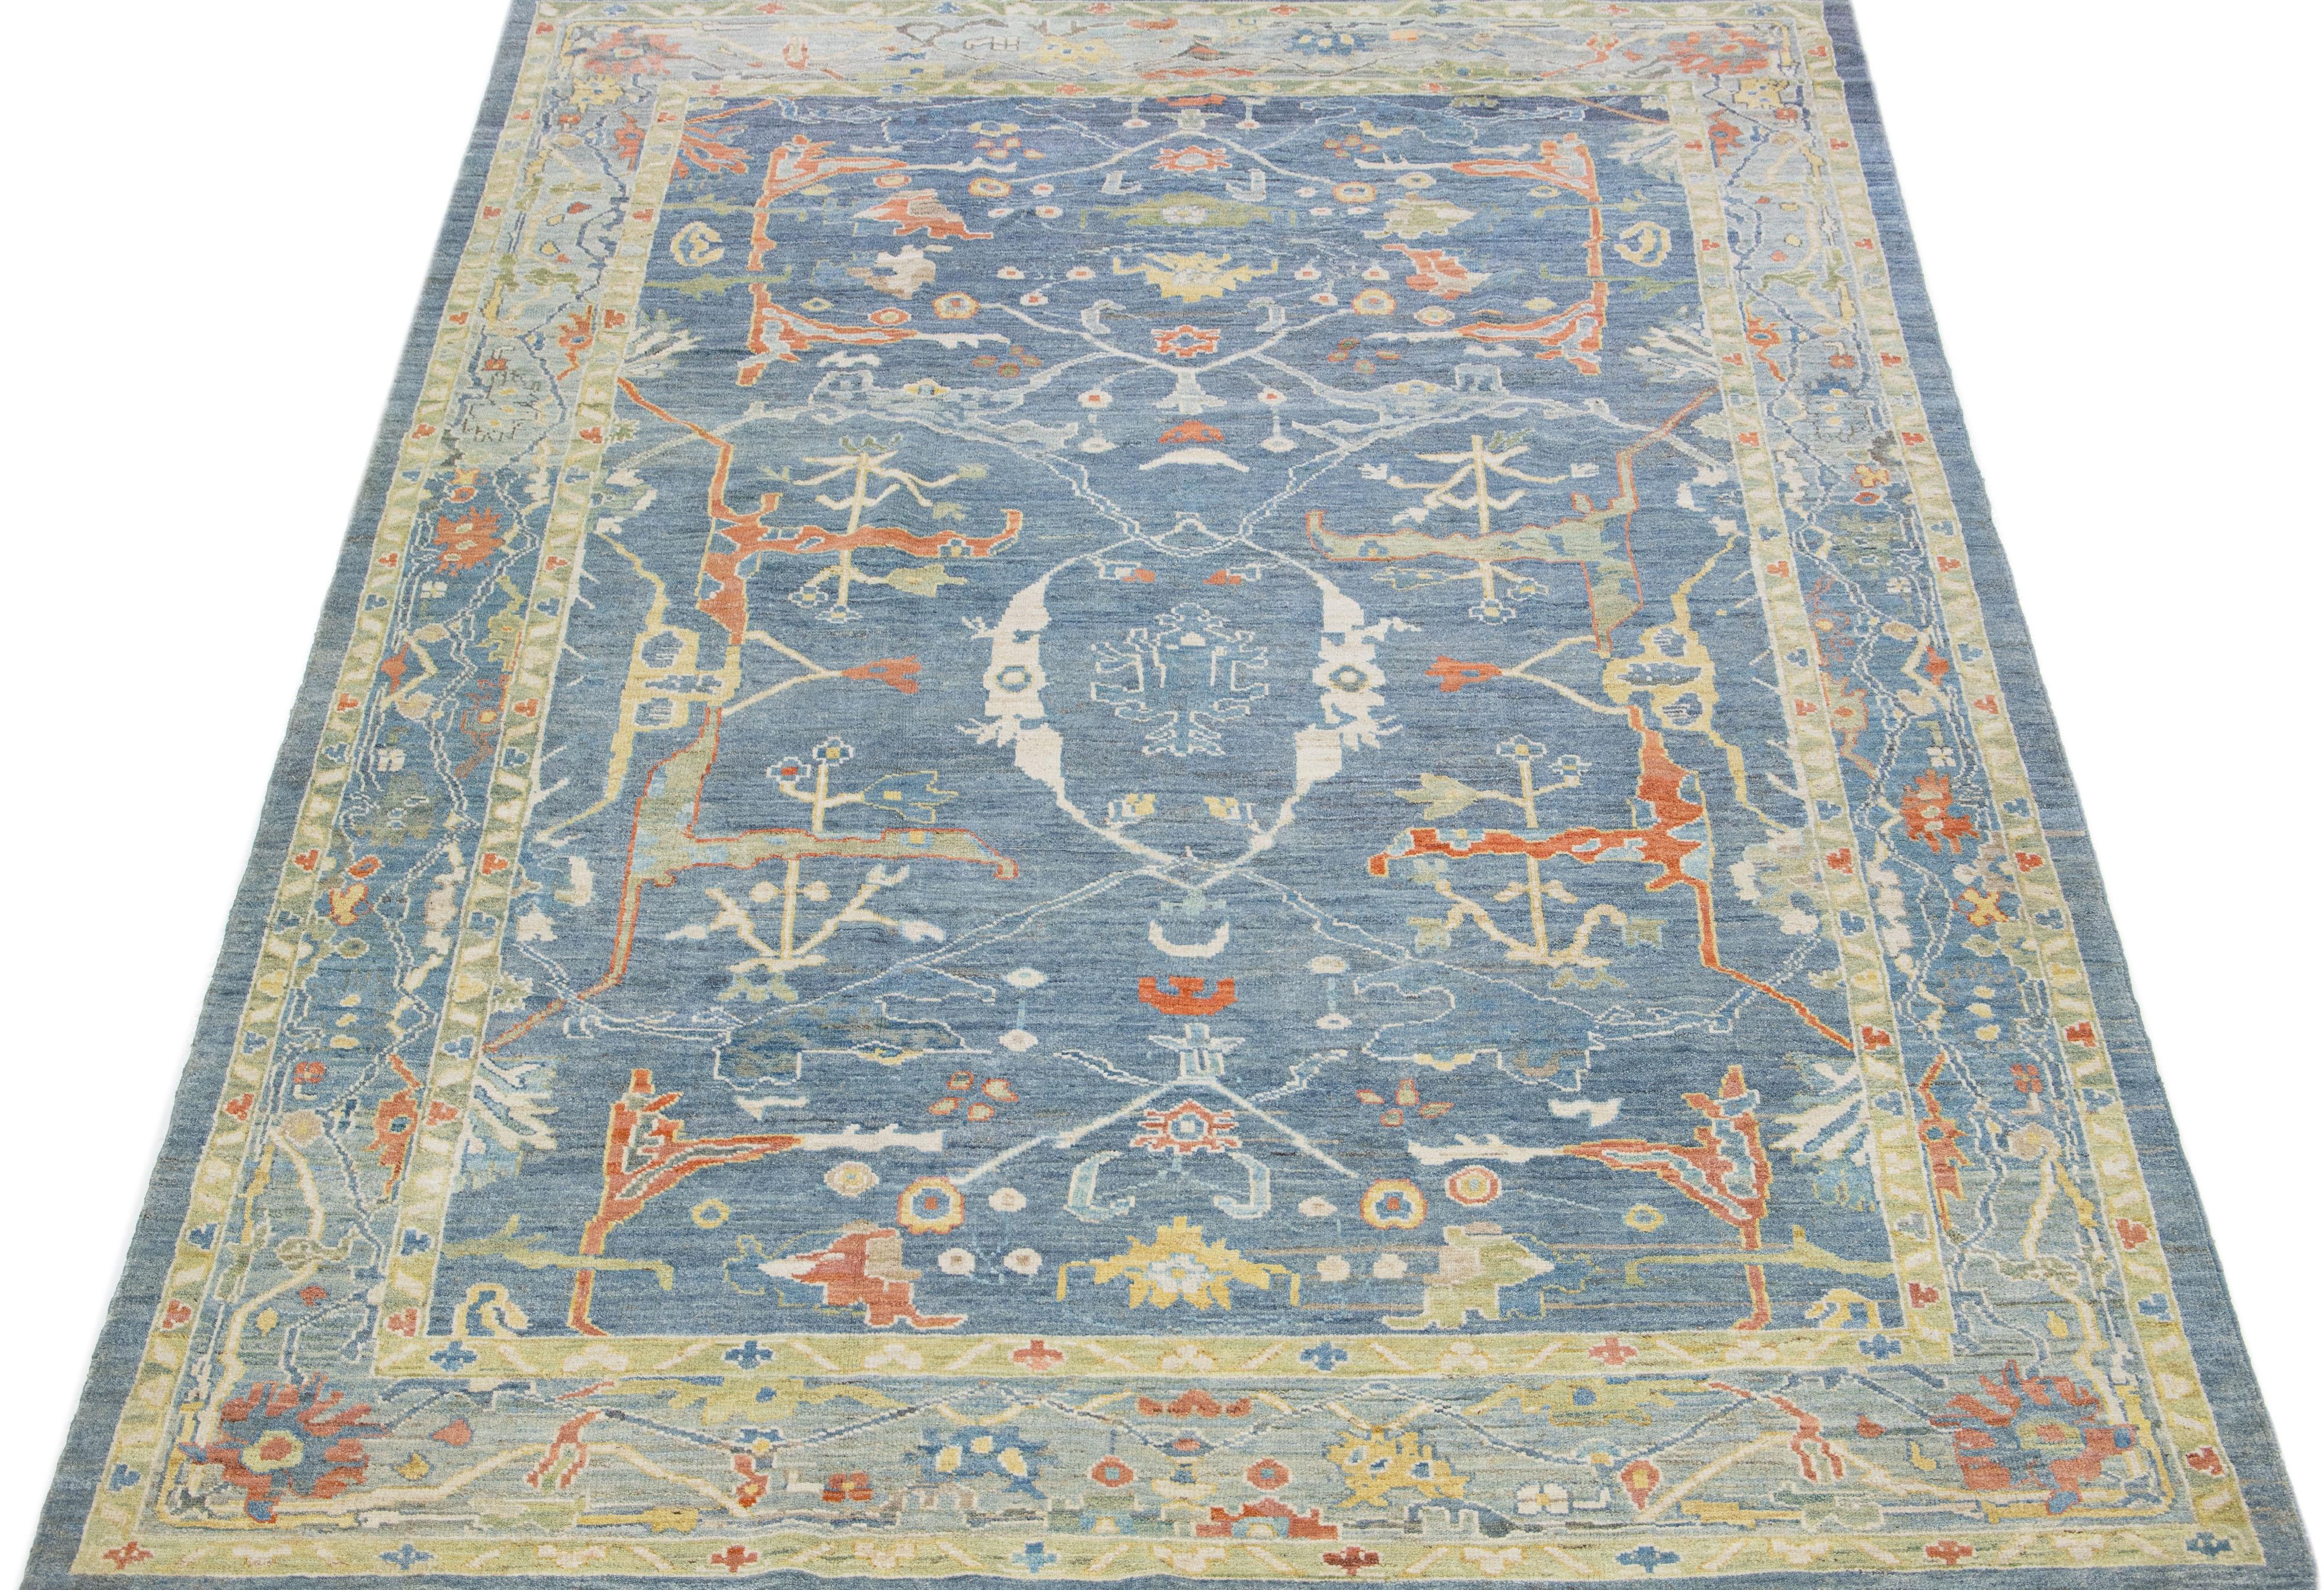 Beautiful modern Sultanabad hand knotted wool rug with a blue color field. This rug has a beige-designed frame with multicolor accents in a gorgeous all-over floral design.

This rug measures: 8'2